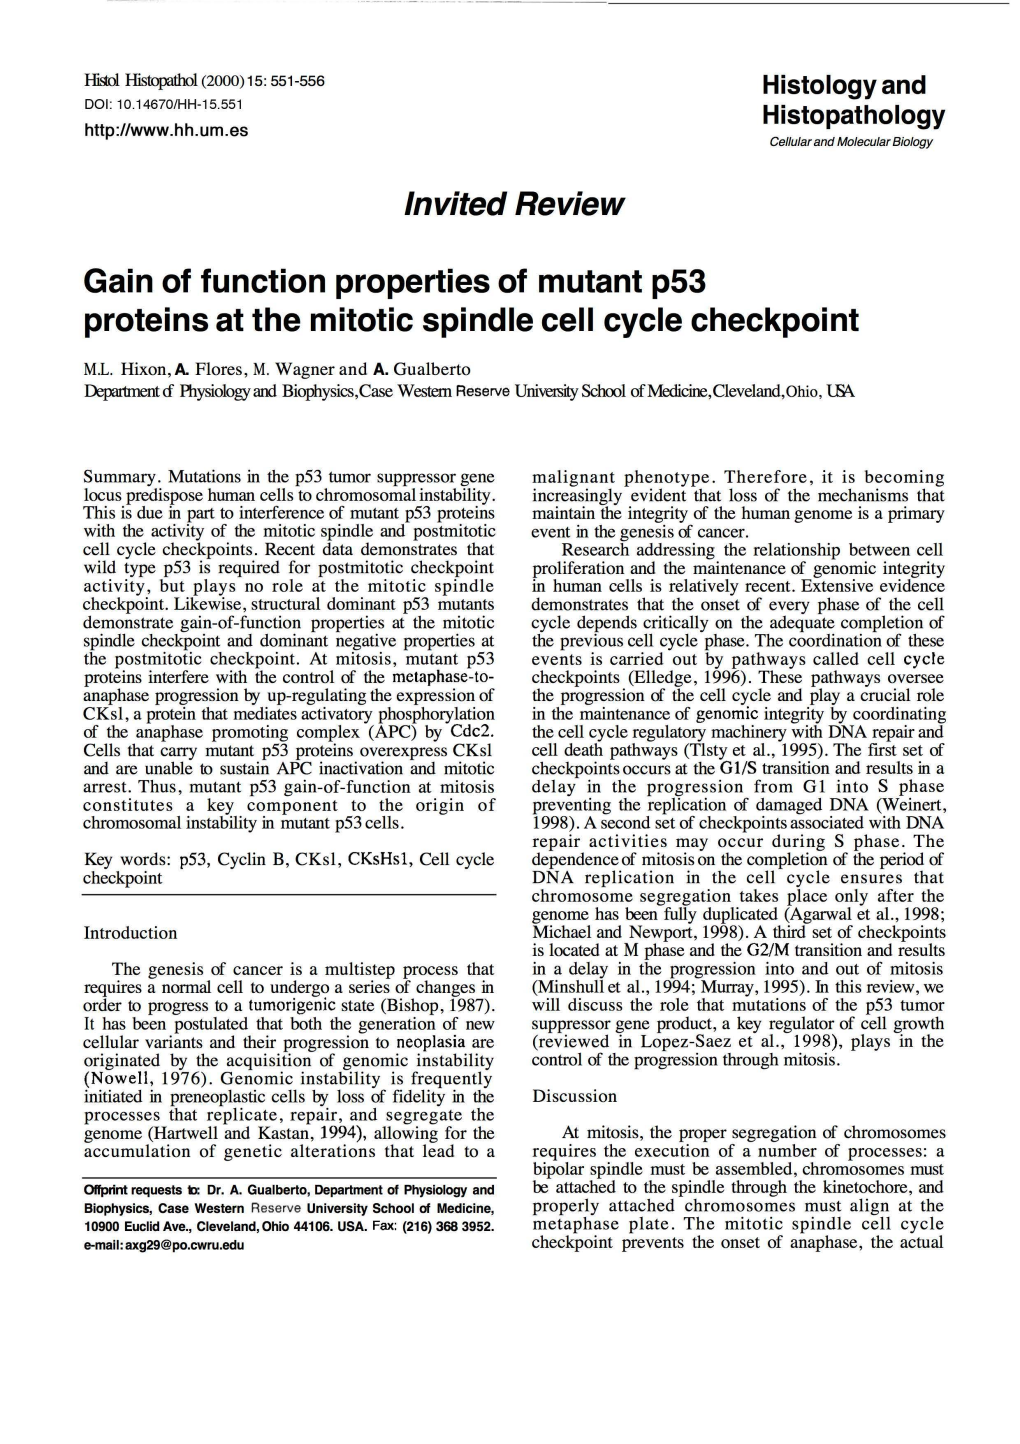 Lnvited Review Gain of Function Properties of Mutant P53 Proteins at the Mitotic Spindle Cell Cycle Checkpoint